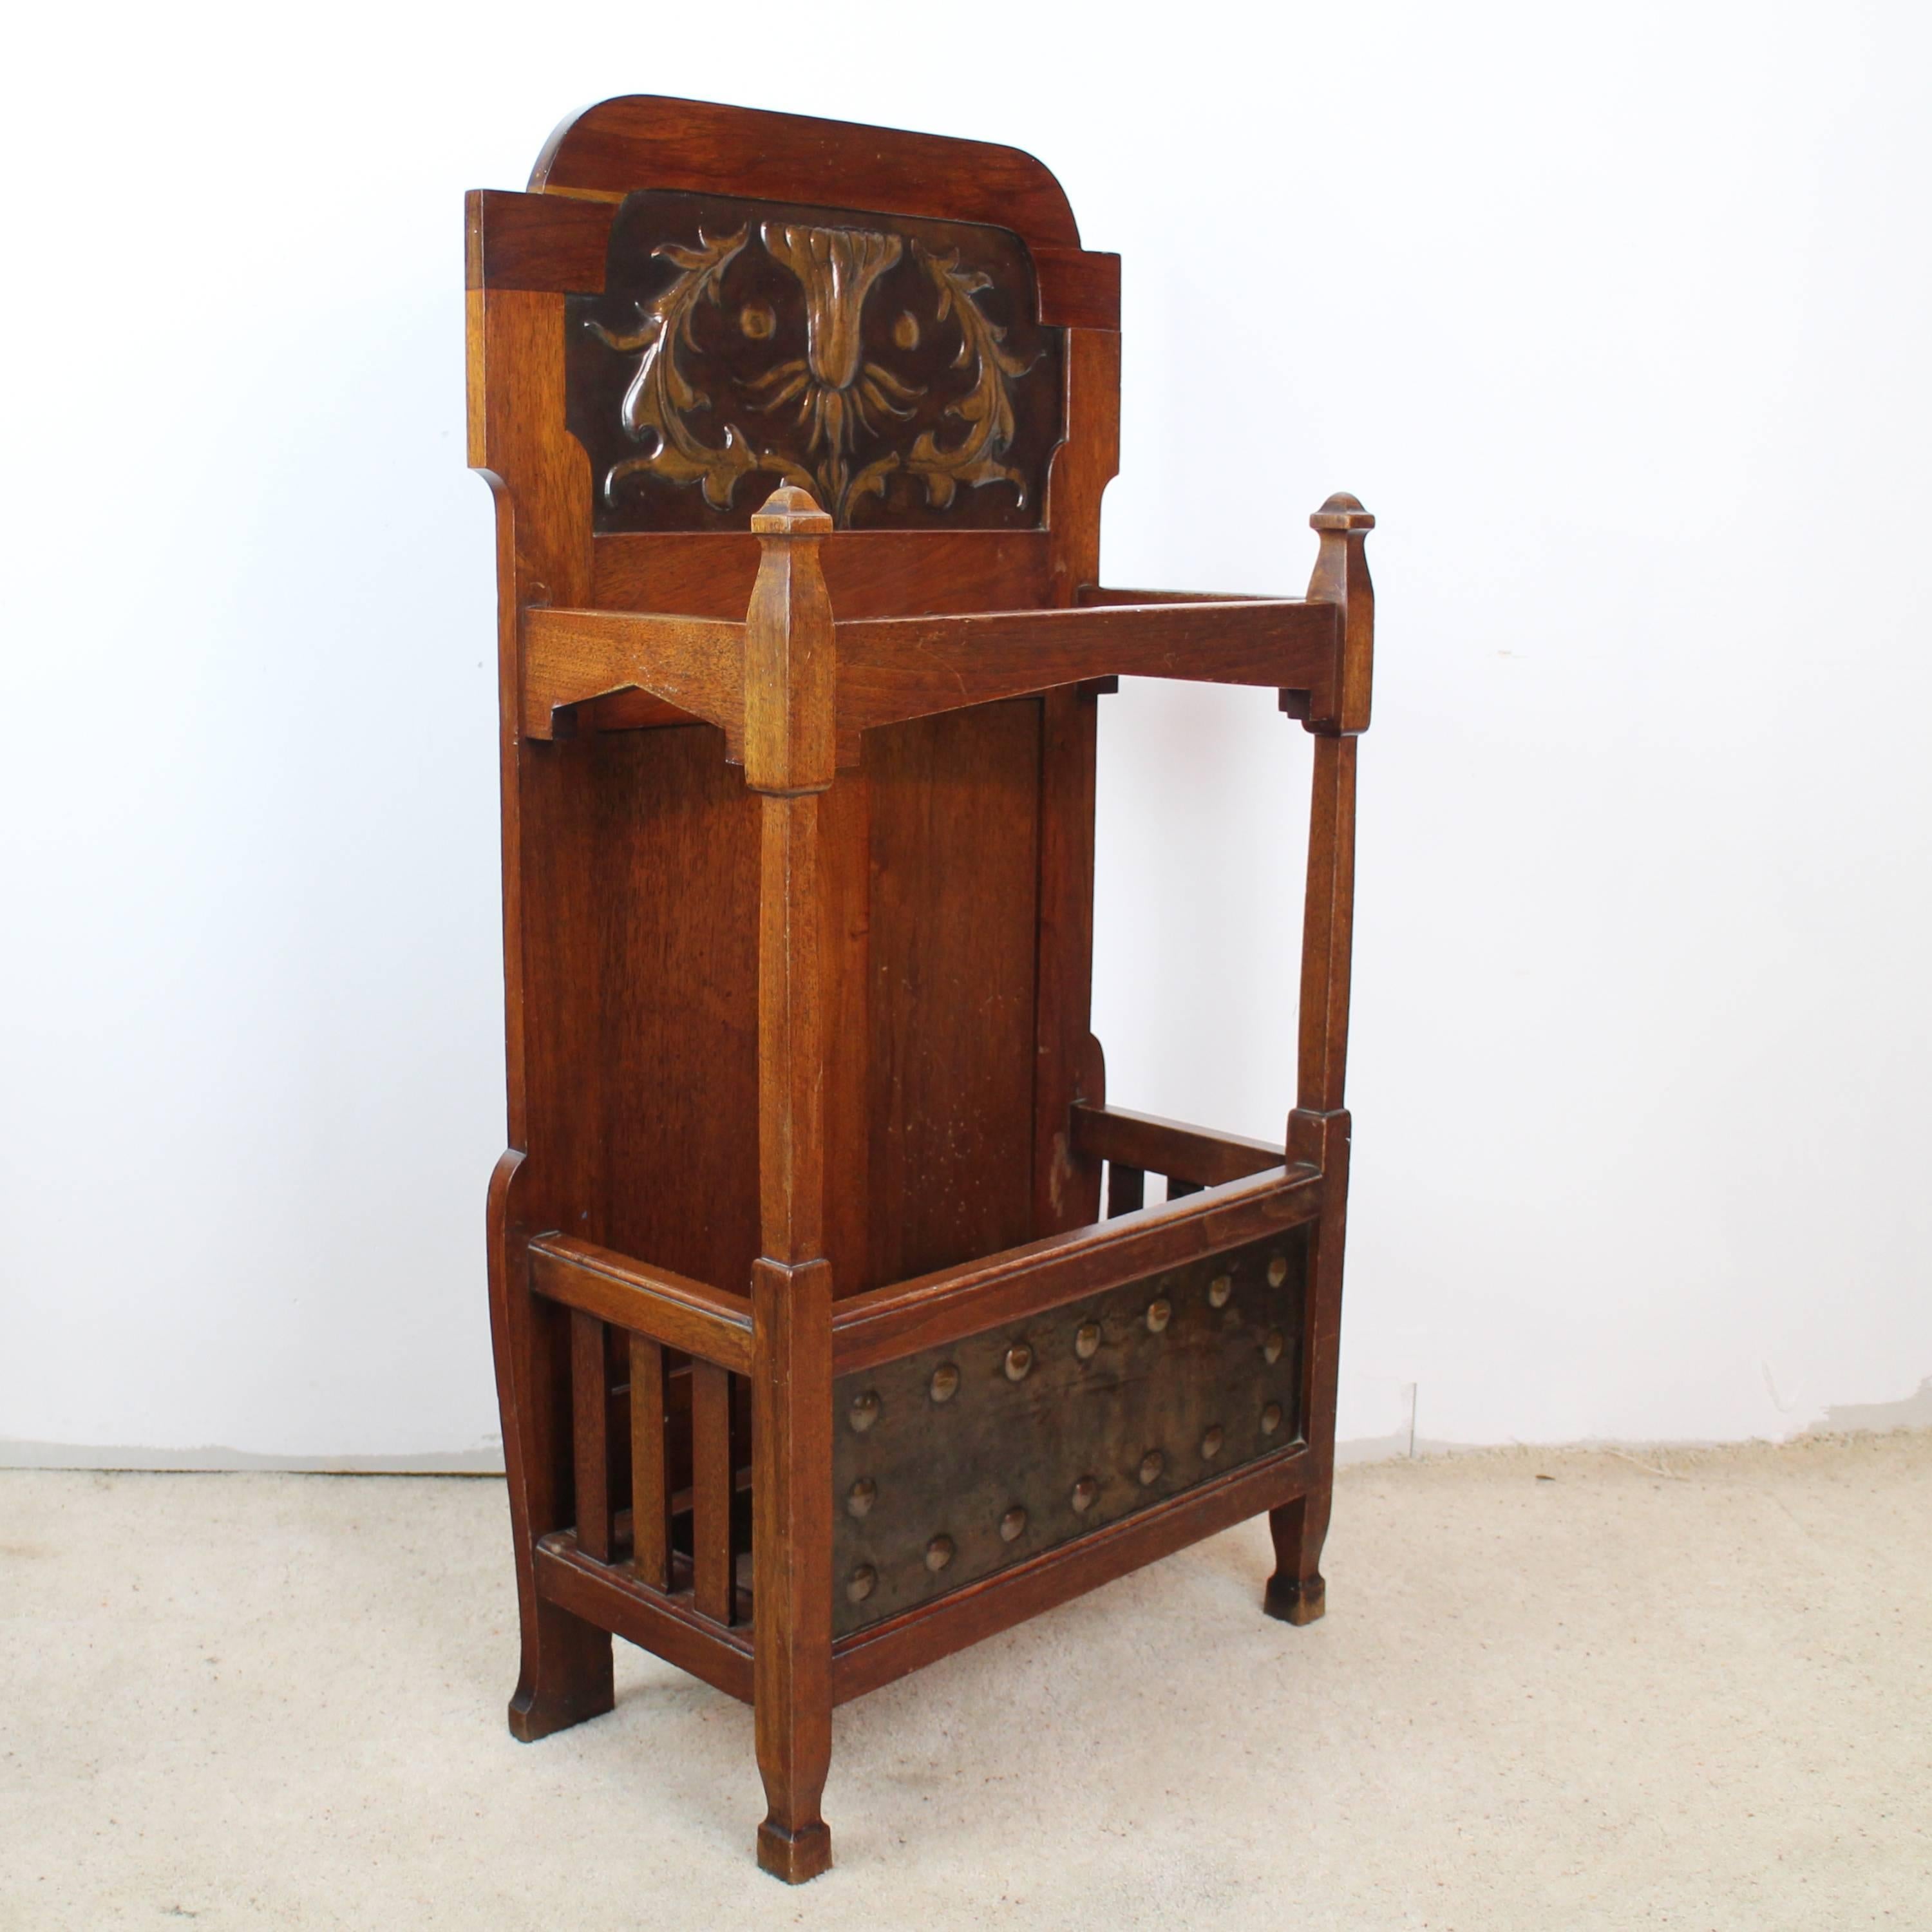 An Arts & Crafts walnut stick or hall stand by Shapland & Petter of Barnstaple and dating to circa 1905, with stylized floral copper panel to the top and copper panel with roundels to the bottom, original drip tray and patina, impressed number to